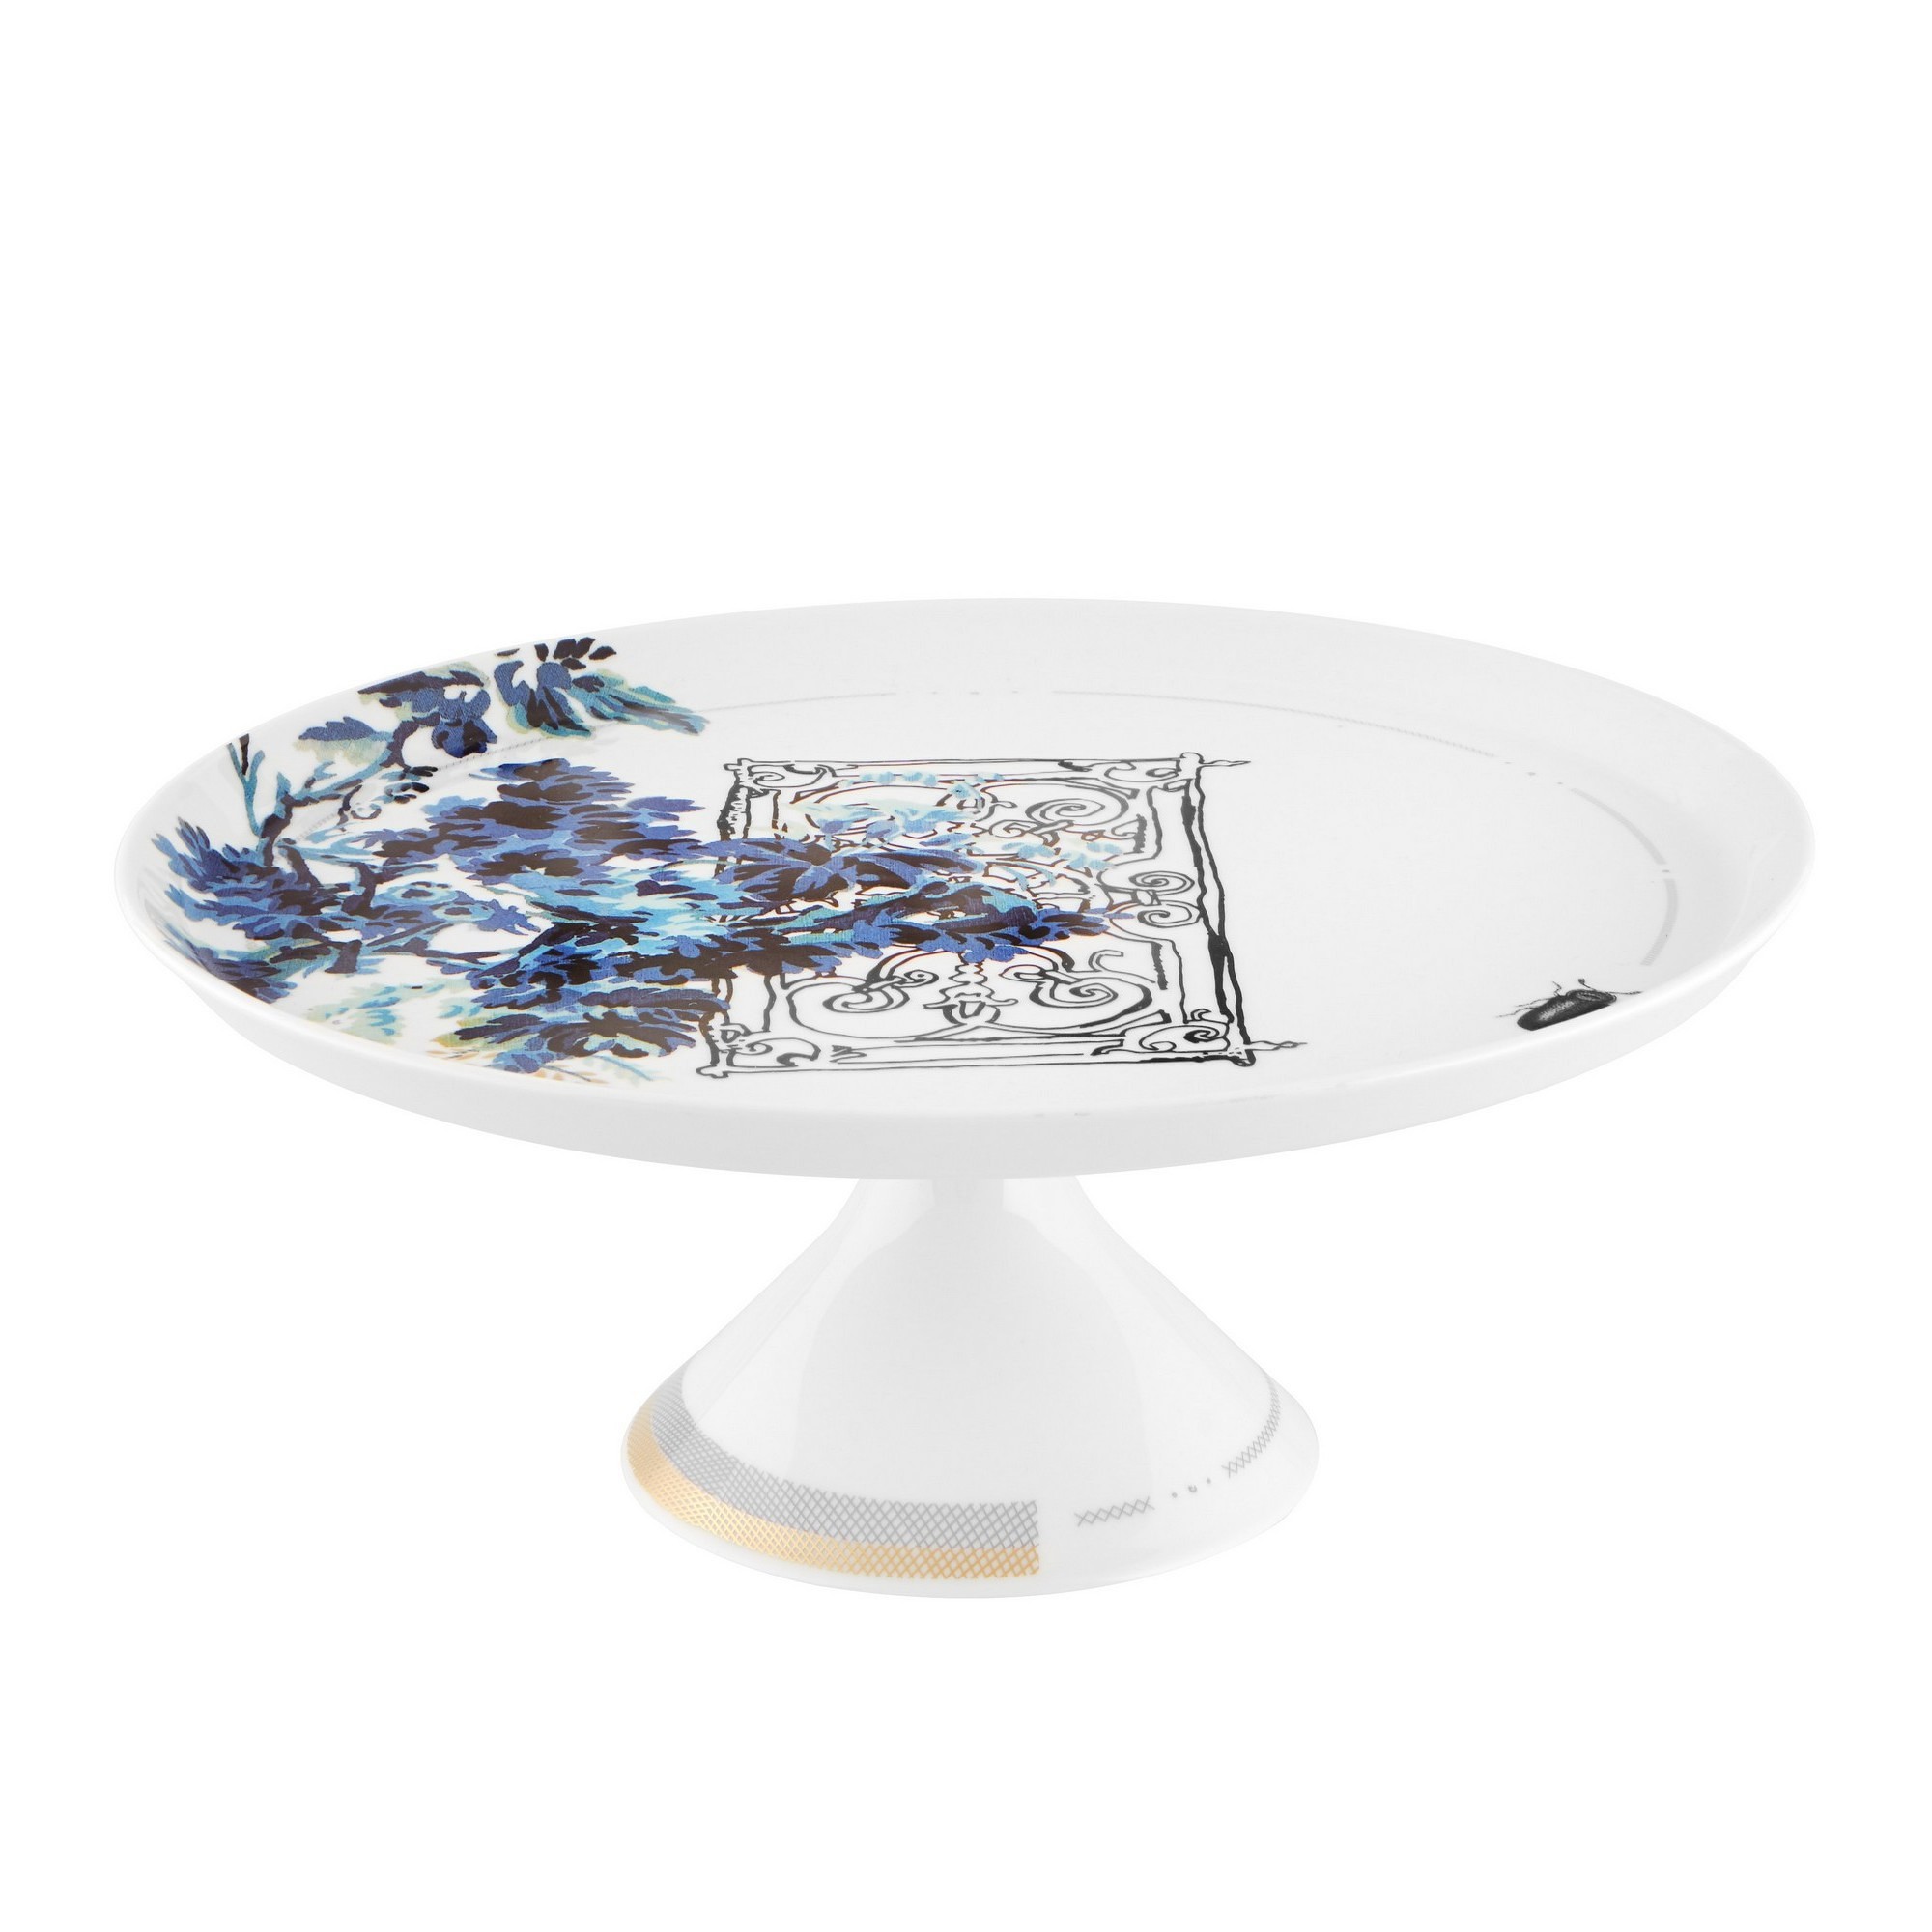 OPEN BOX: Petites Histoires Cake Stands